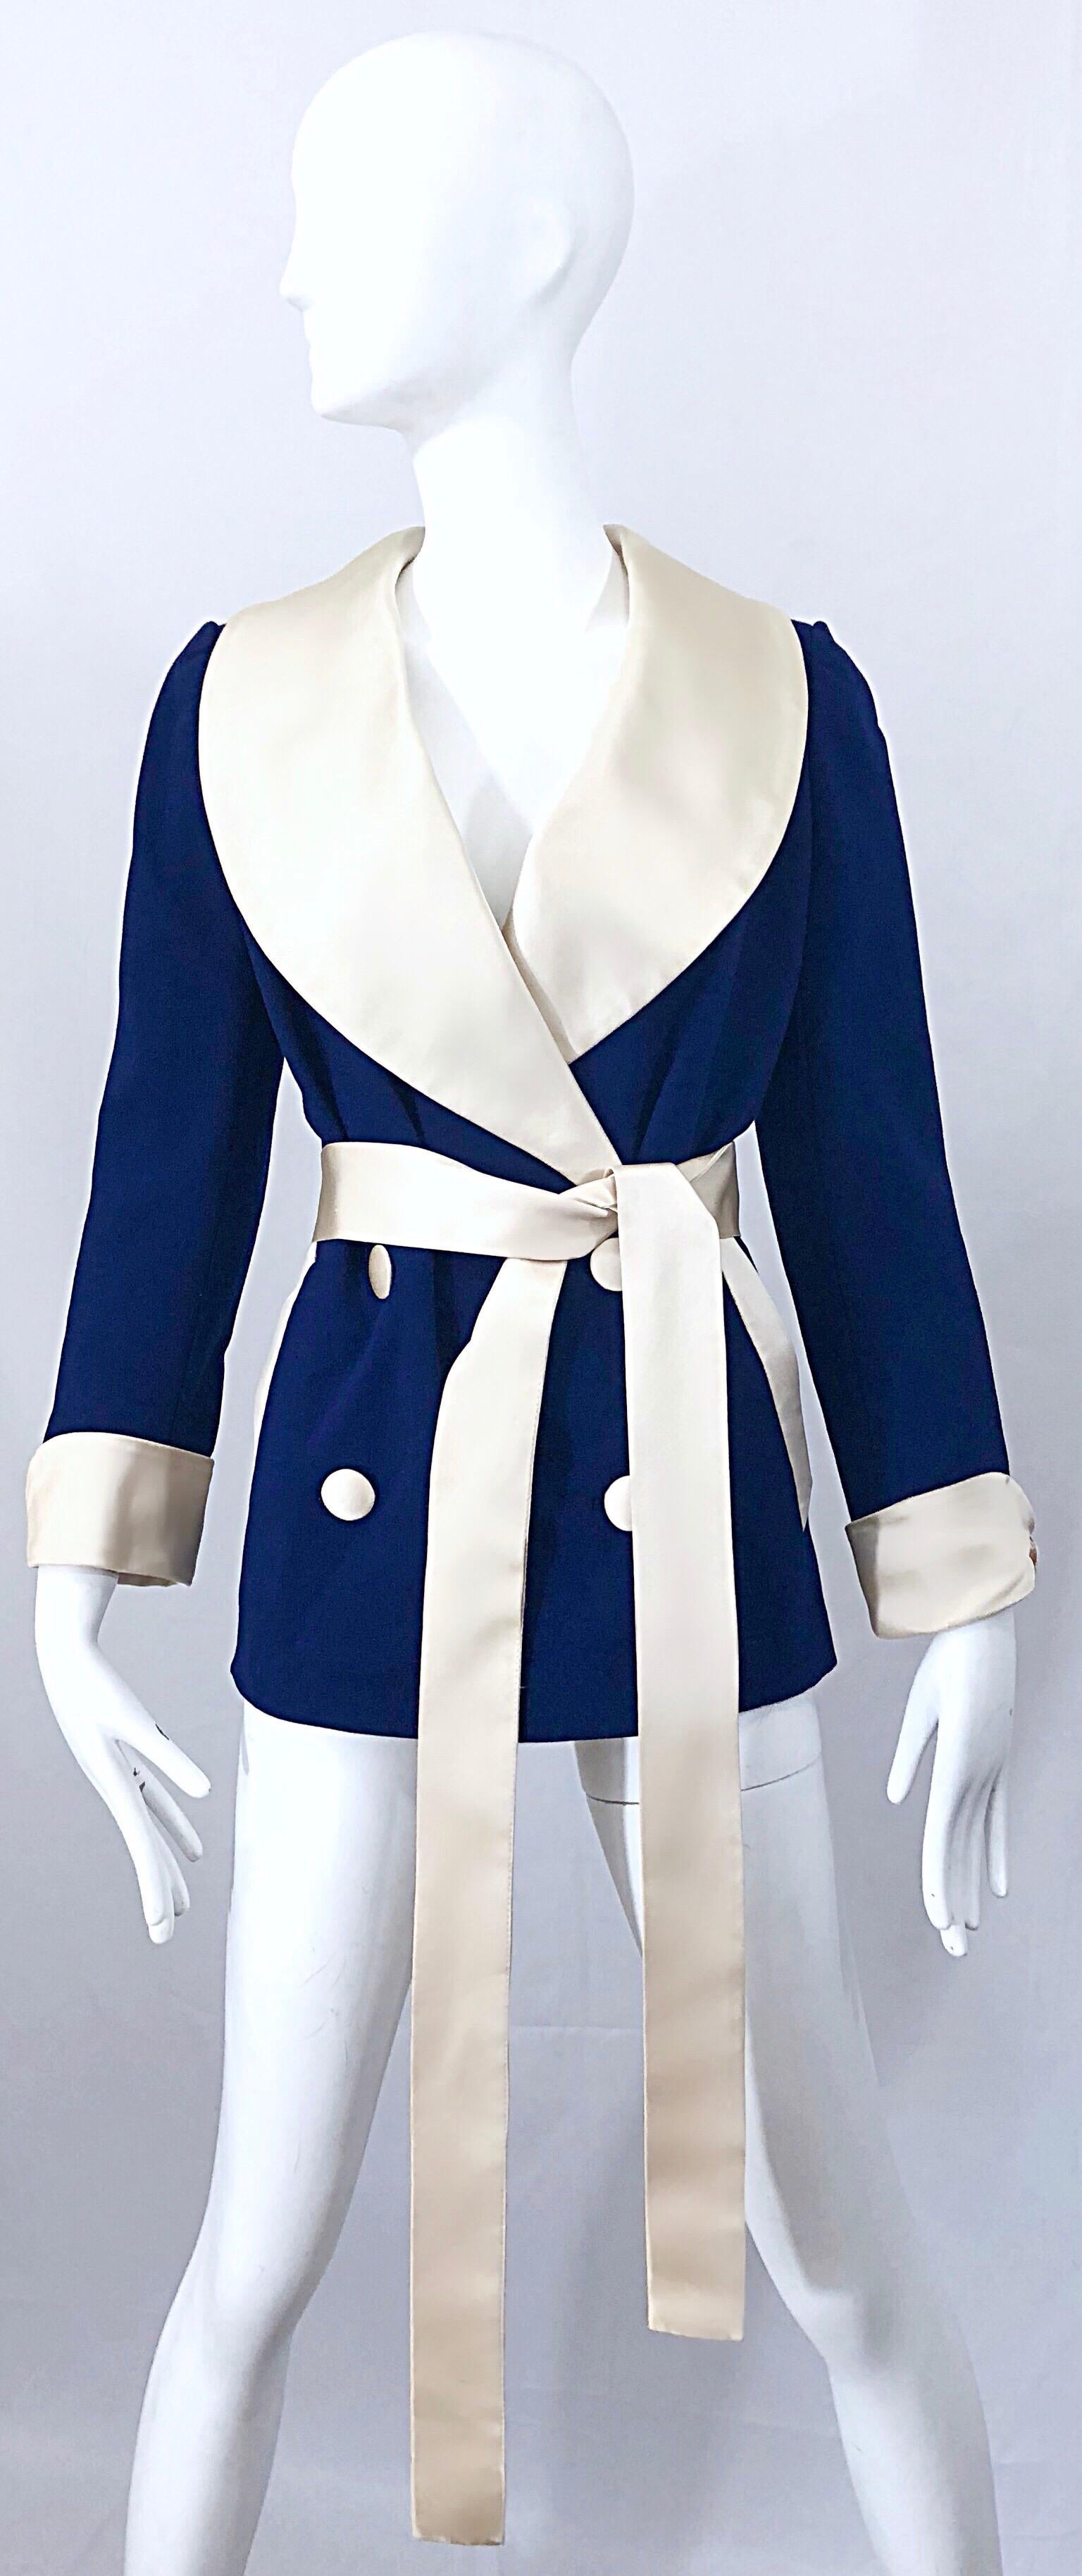 Rare 1960s Norman Norell Navy Blue + Ivory Vintage 60s Belted Smoking Jacket For Sale 6